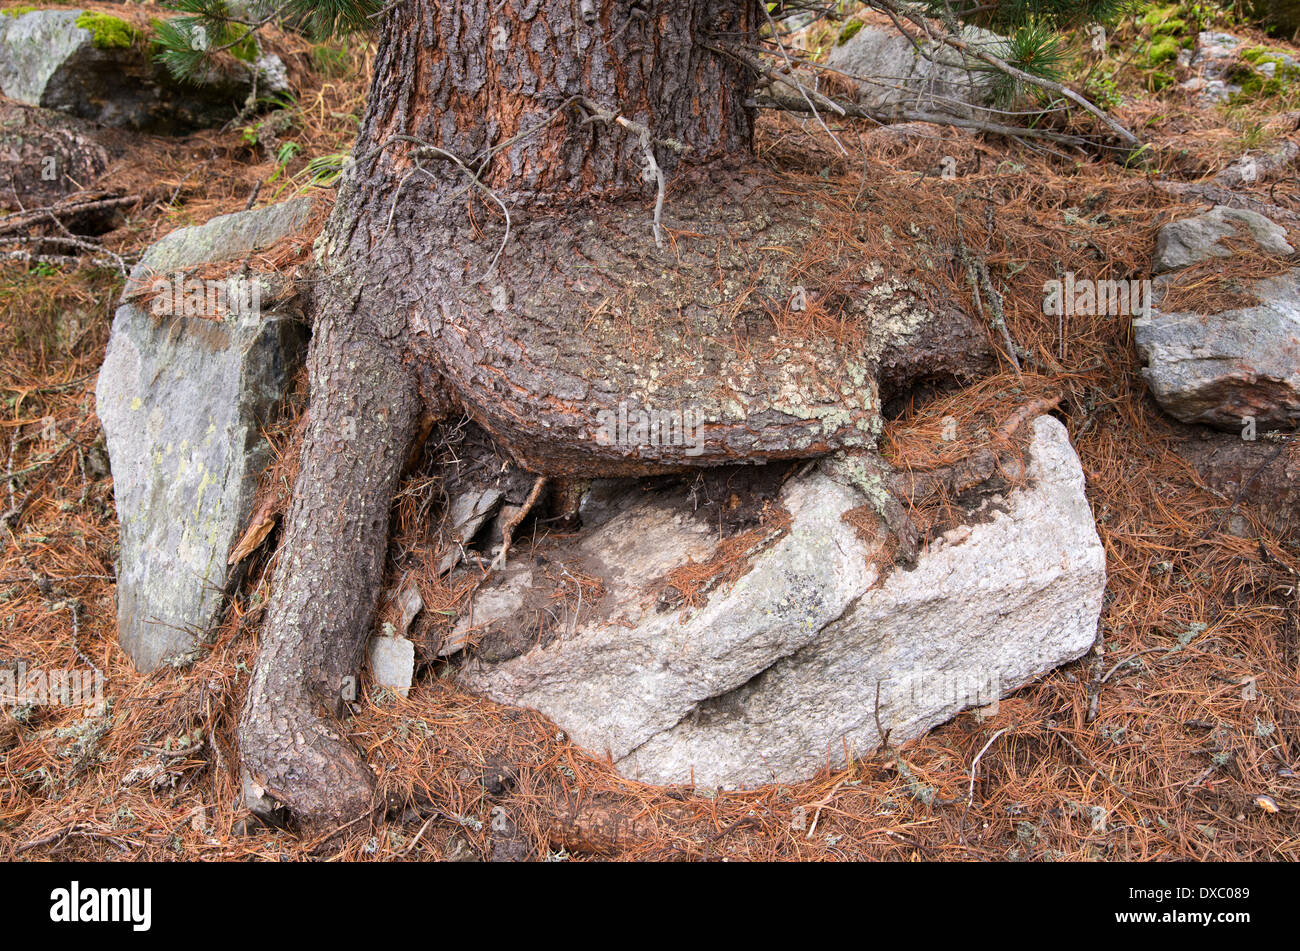 Tree roots and stone, Aletsch forest, Valais, Swiss Alps, Switzerland Stock Photo